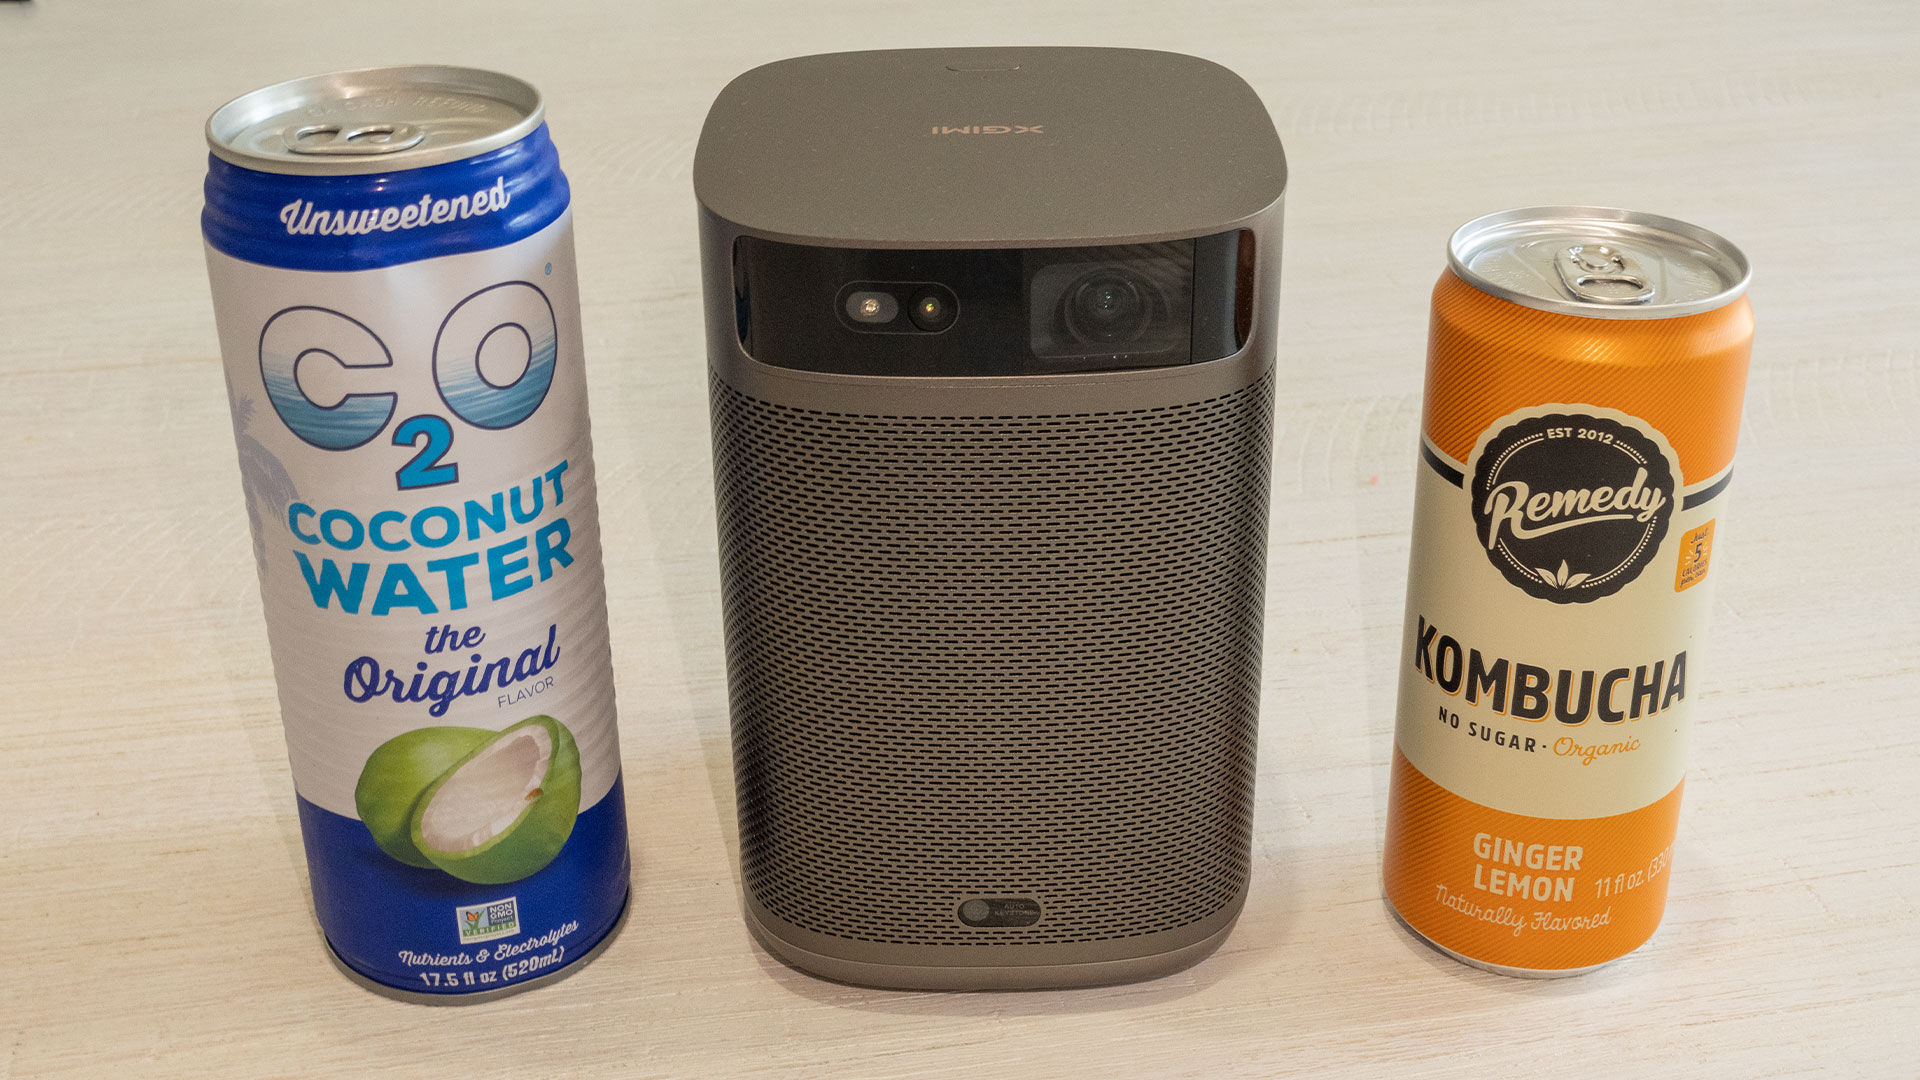 Xgimi Mogo 2 Pro Size Compared to Beverage Cans - Projector Reviews - Image